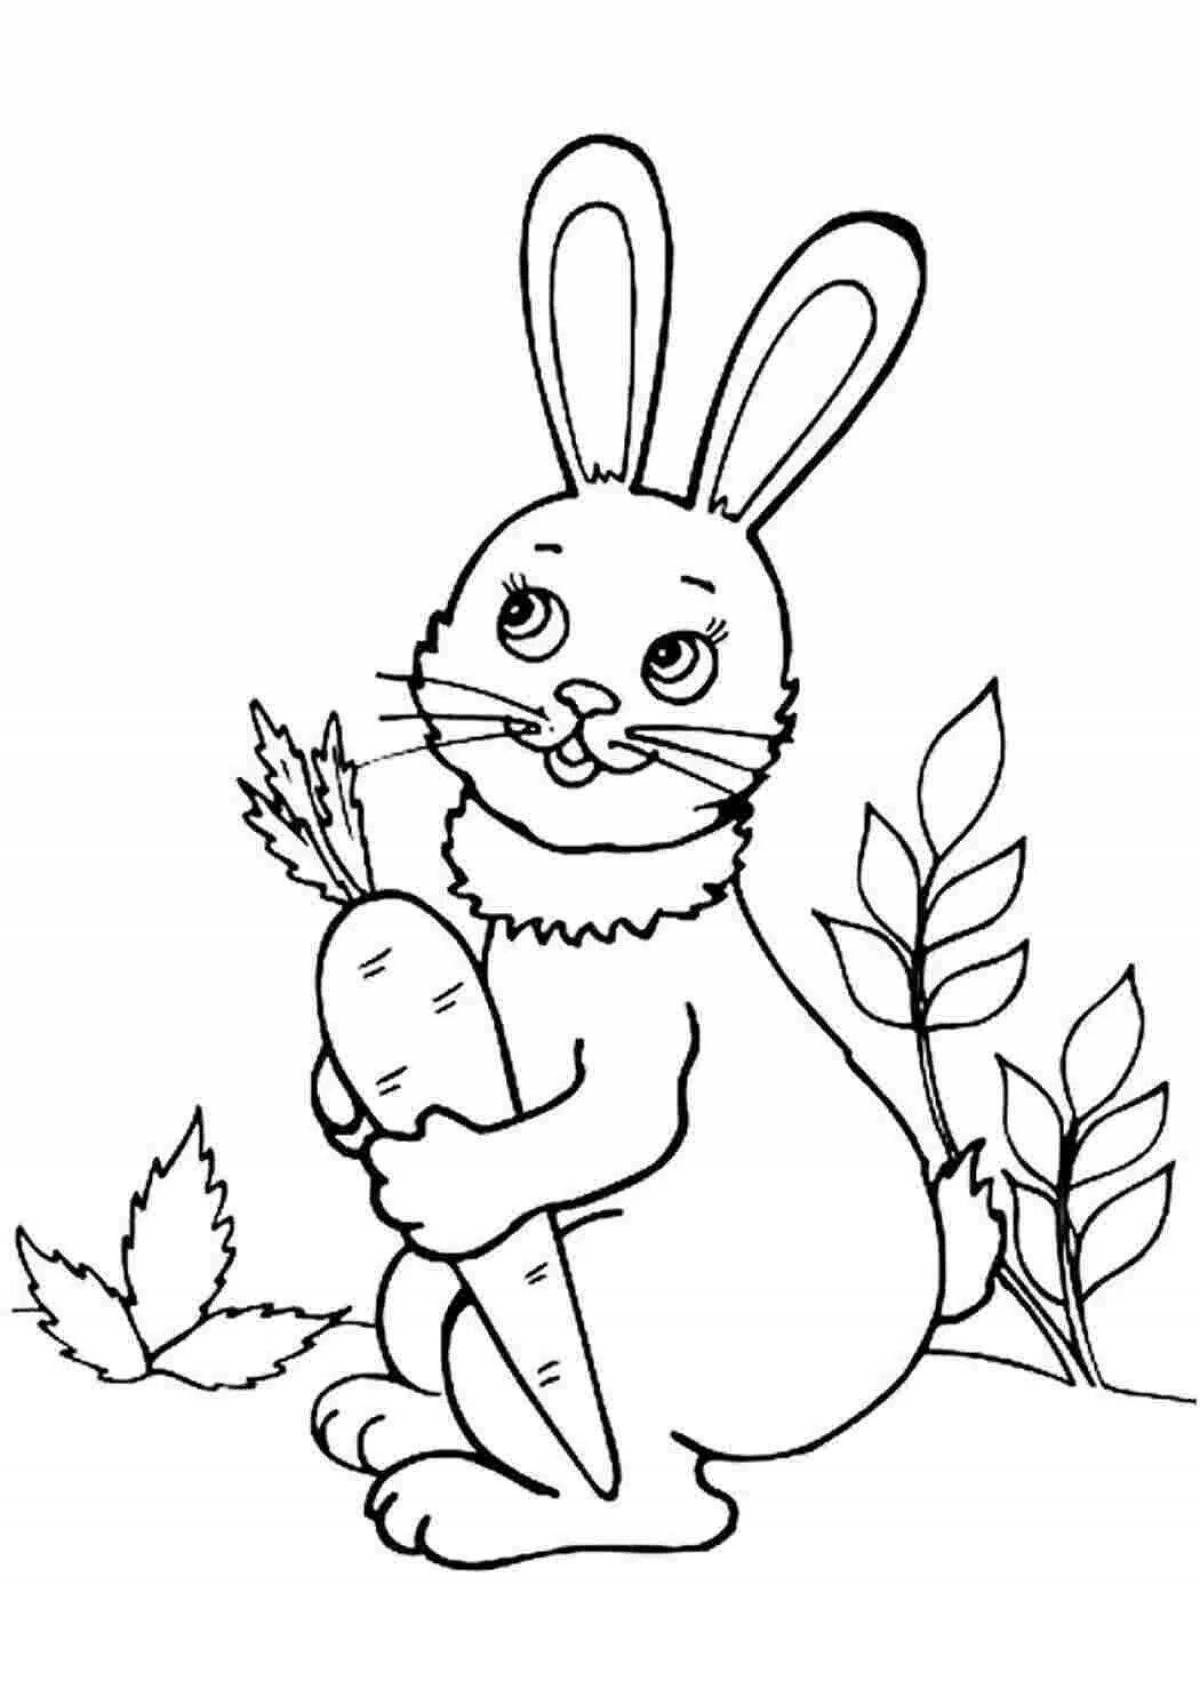 Fancy rabbit coloring book for kids 3 4